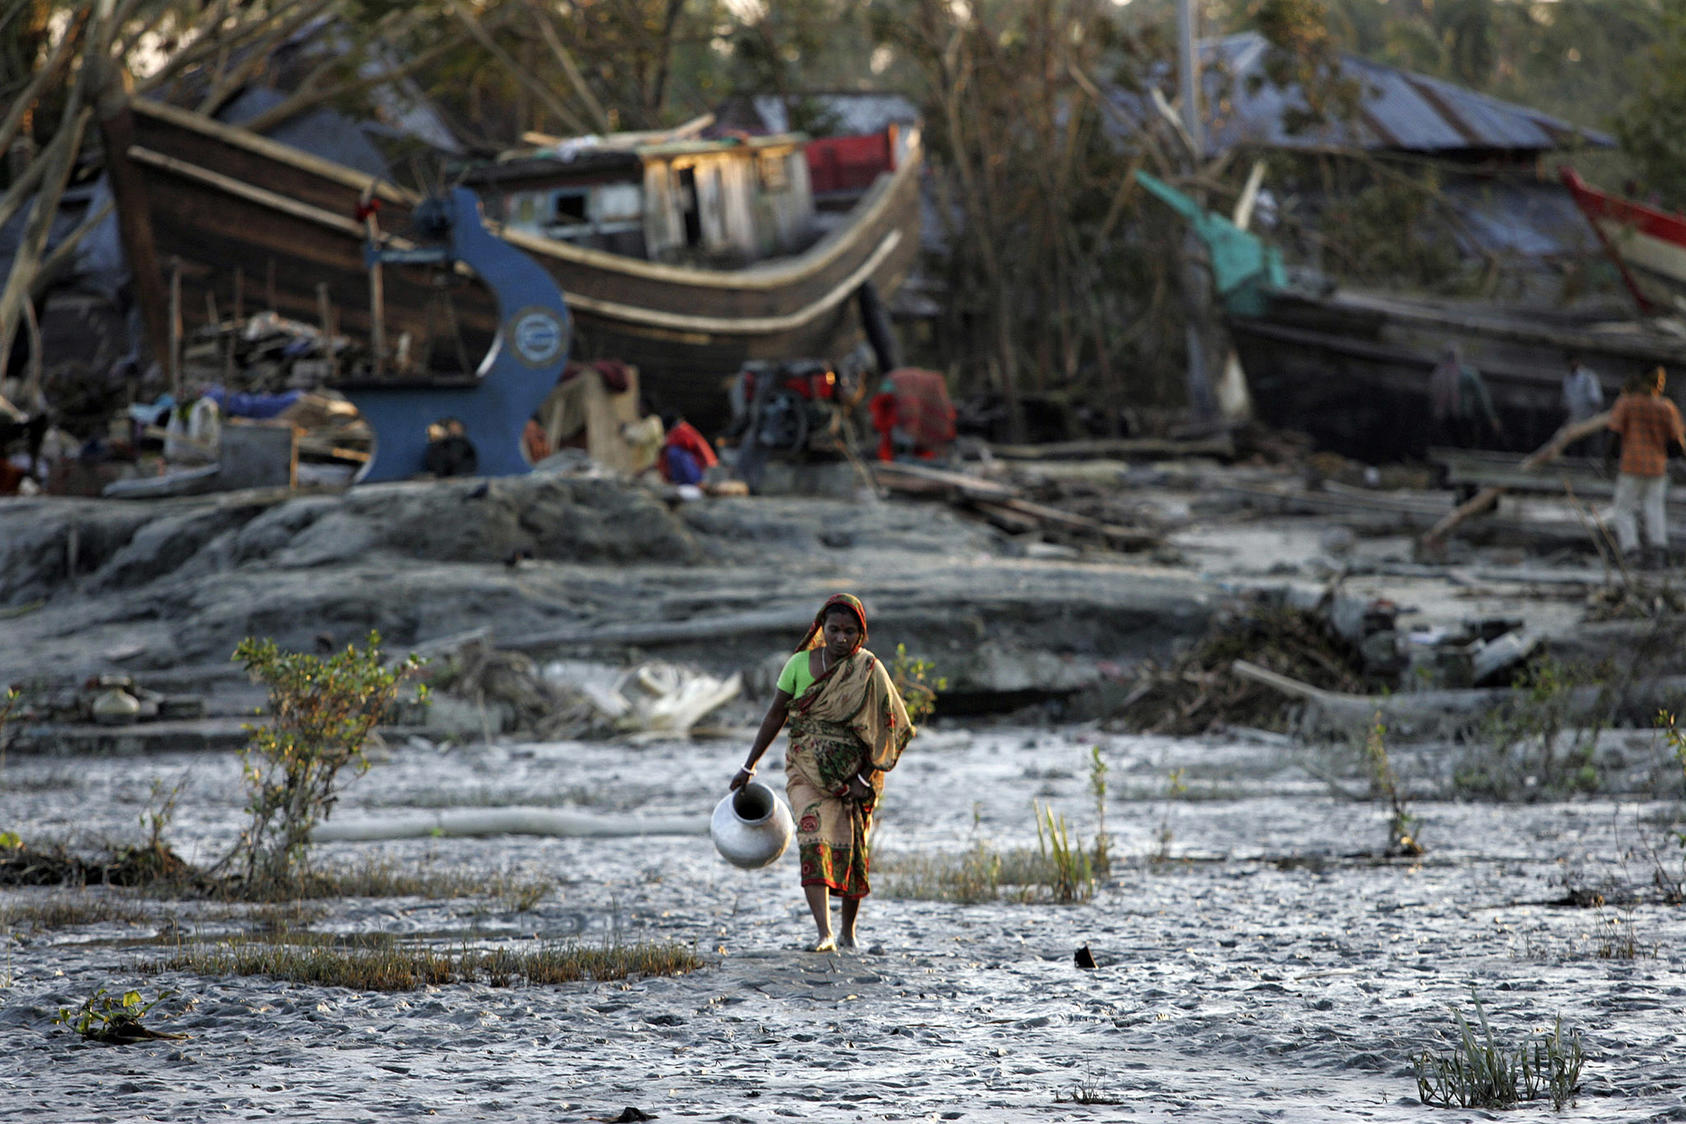 A woman walks through the mud and wreckage after a cyclone hit in the village of Khatachira, Bangladesh. November 20, 2007. (Ruth Fremson/The New York Times)